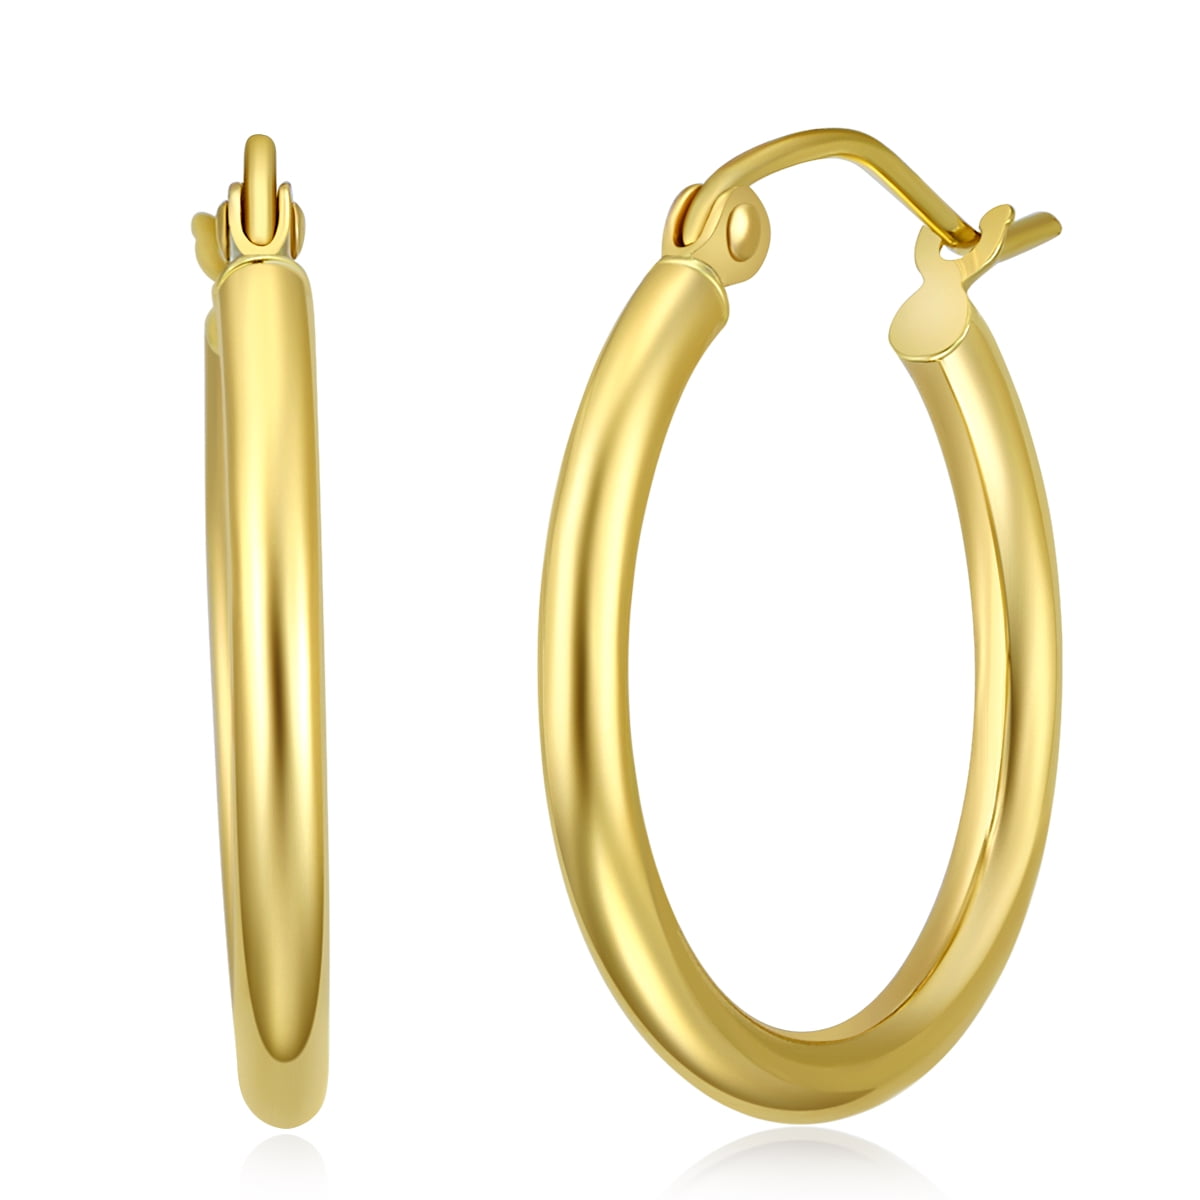 10 Different Size Available Wellingsale Ladies 14k Yellow Gold Polished 2mm Hinged Classic Hoop Earrings